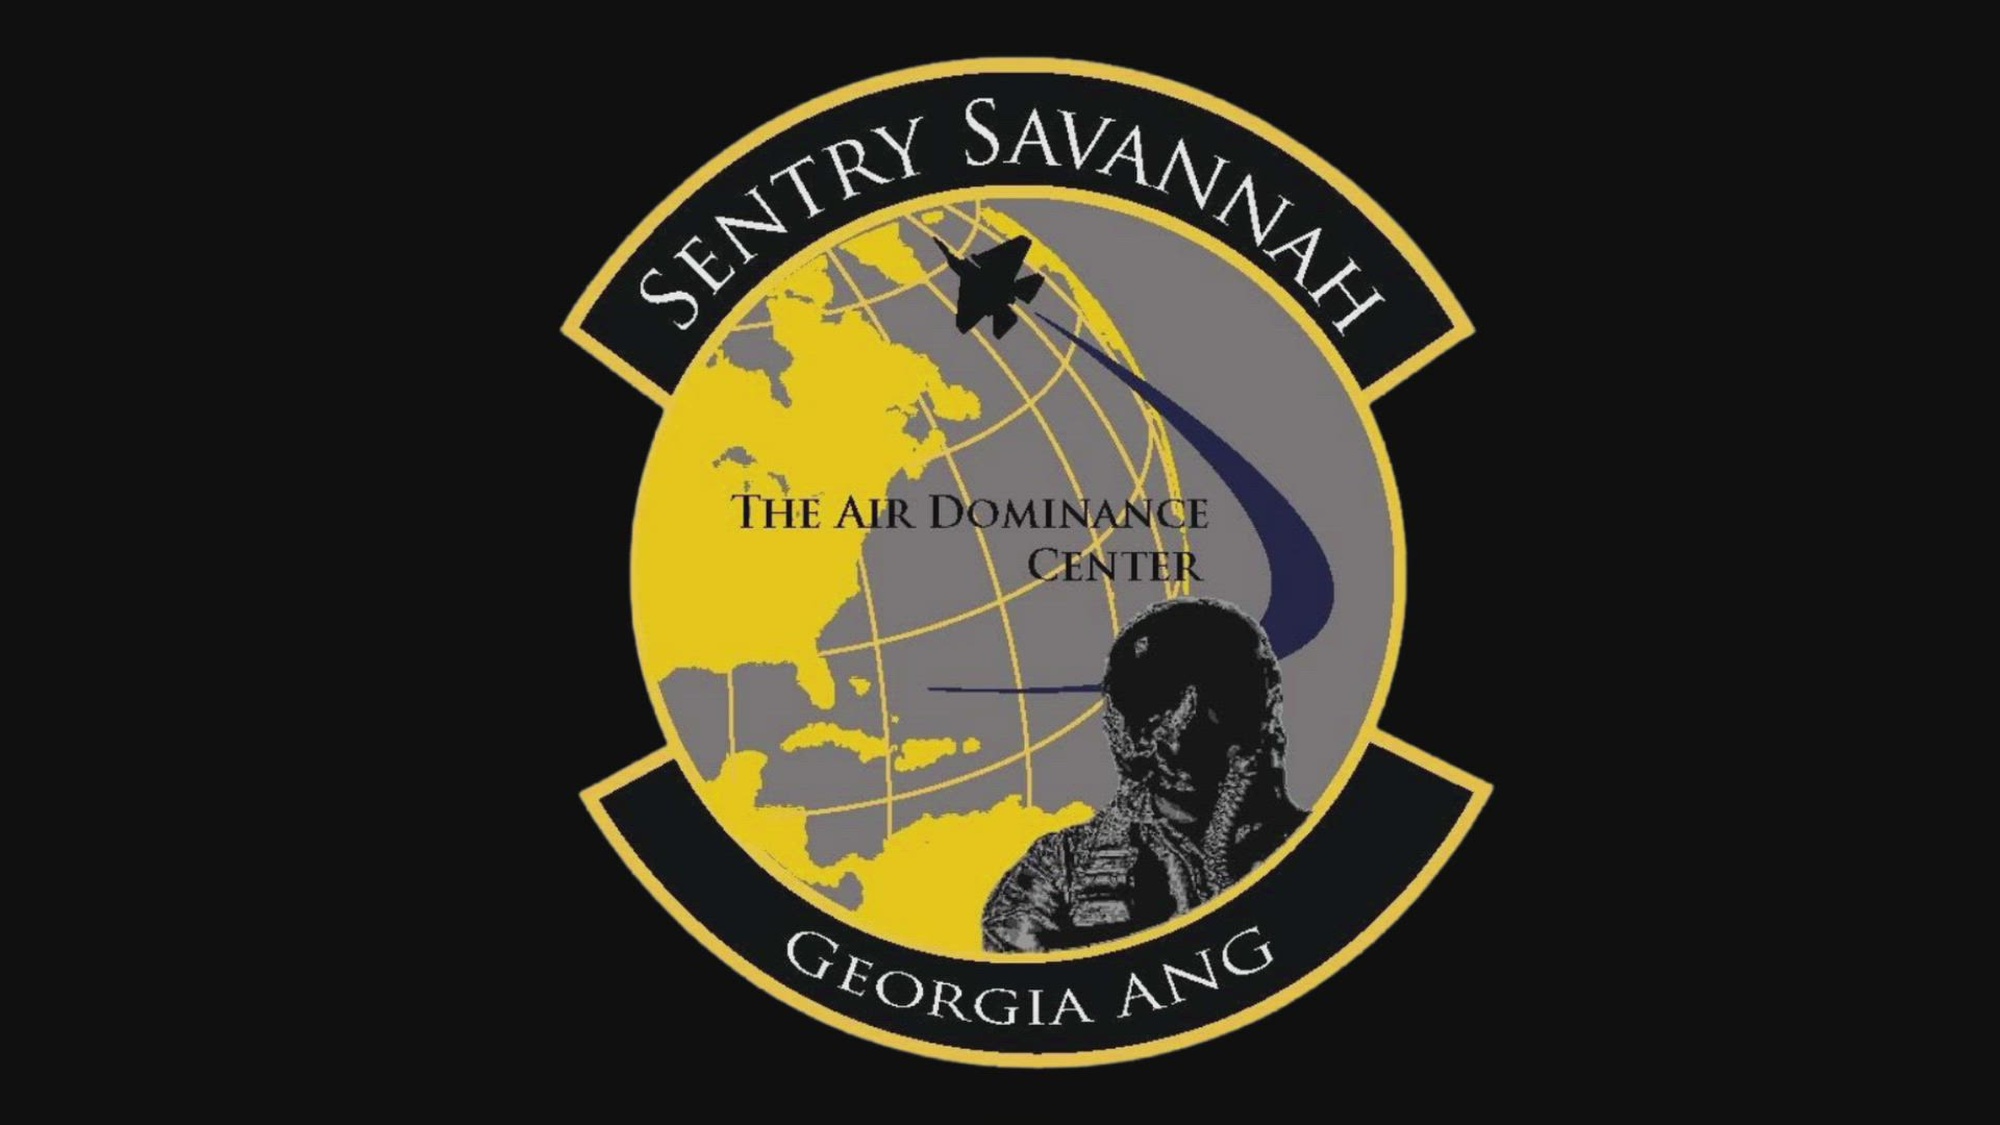 Reservists from the 419th Fighter Wing at Hill Air Force Base participate in Sentry Savannah, the Air National Guard’s largest 4th and 5th generation fighter aircraft exercise which began May 2, 2020. The exercise is held annually at the Air Dominance Center which is one of only four Combat Readiness Training Centers in the United States. This is the first year the 419th FW has participated in the event, which it will use to validate its deployment model known as Agile Combat Employment. (U.S. Air Force video by Staff Sergeant Anthony Pham)